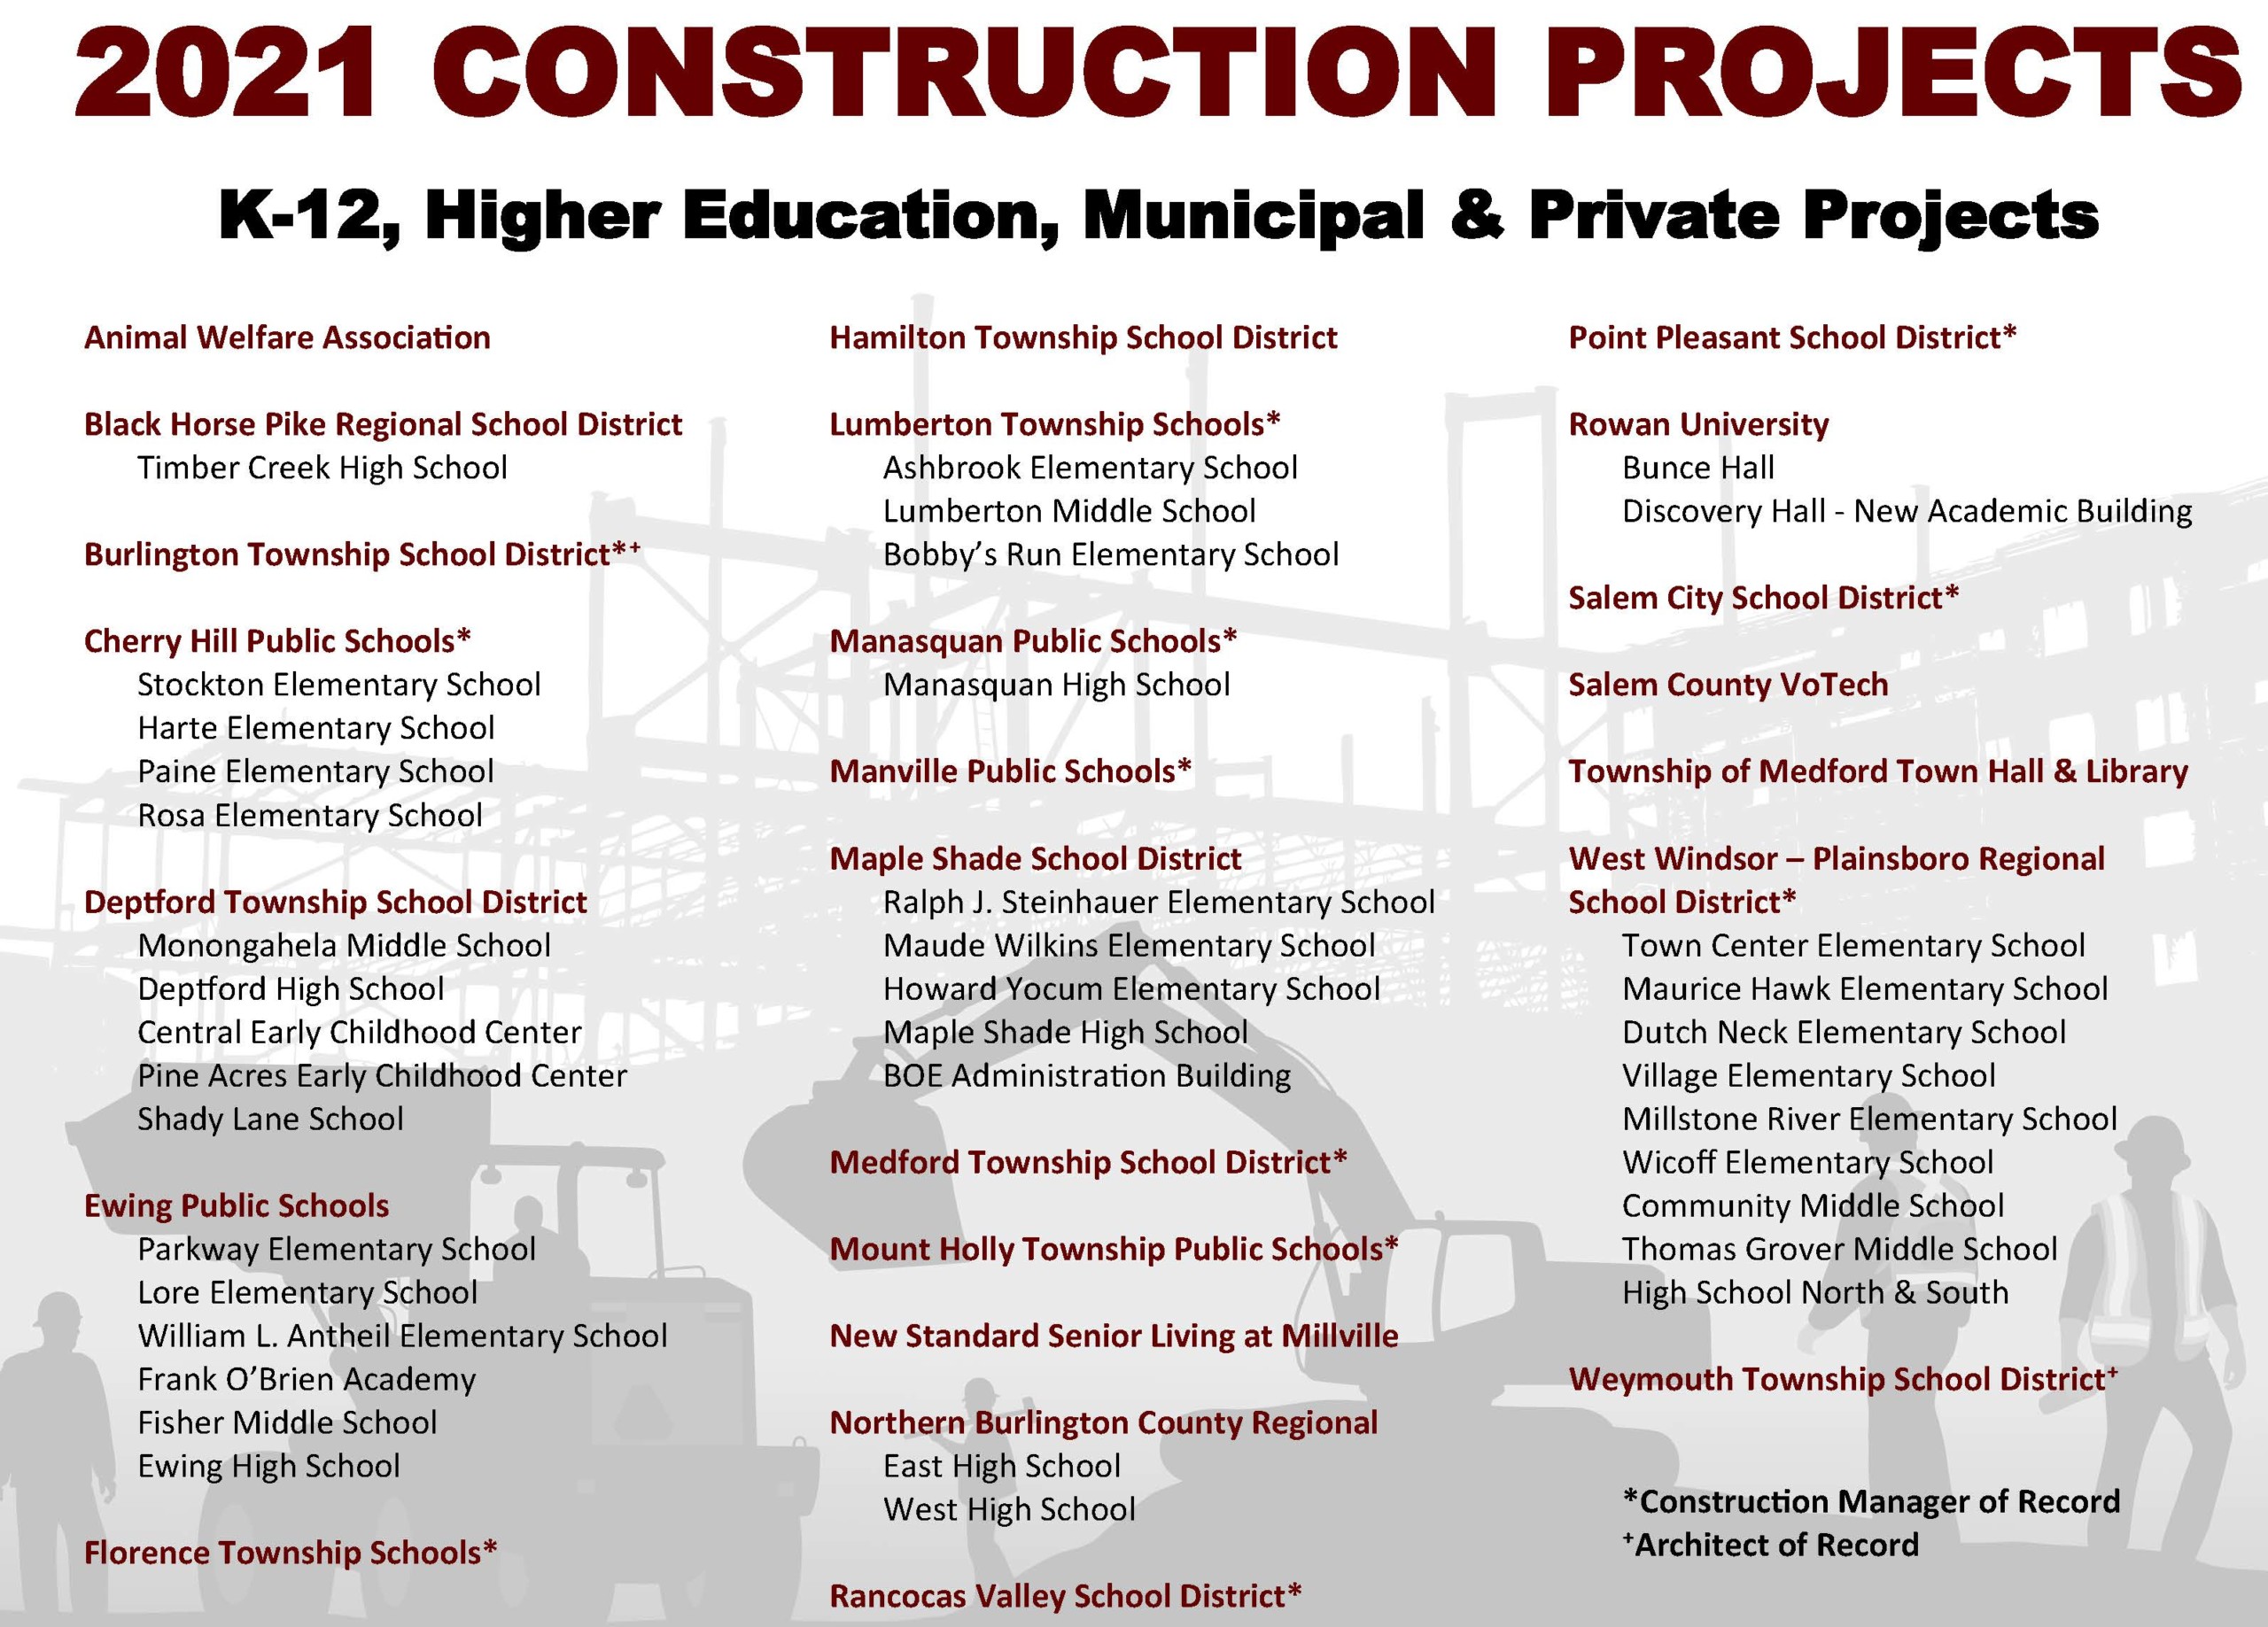 2021 CONSTRUCTION PROJECTS - K-12, Higher Ed, Municipal & Private